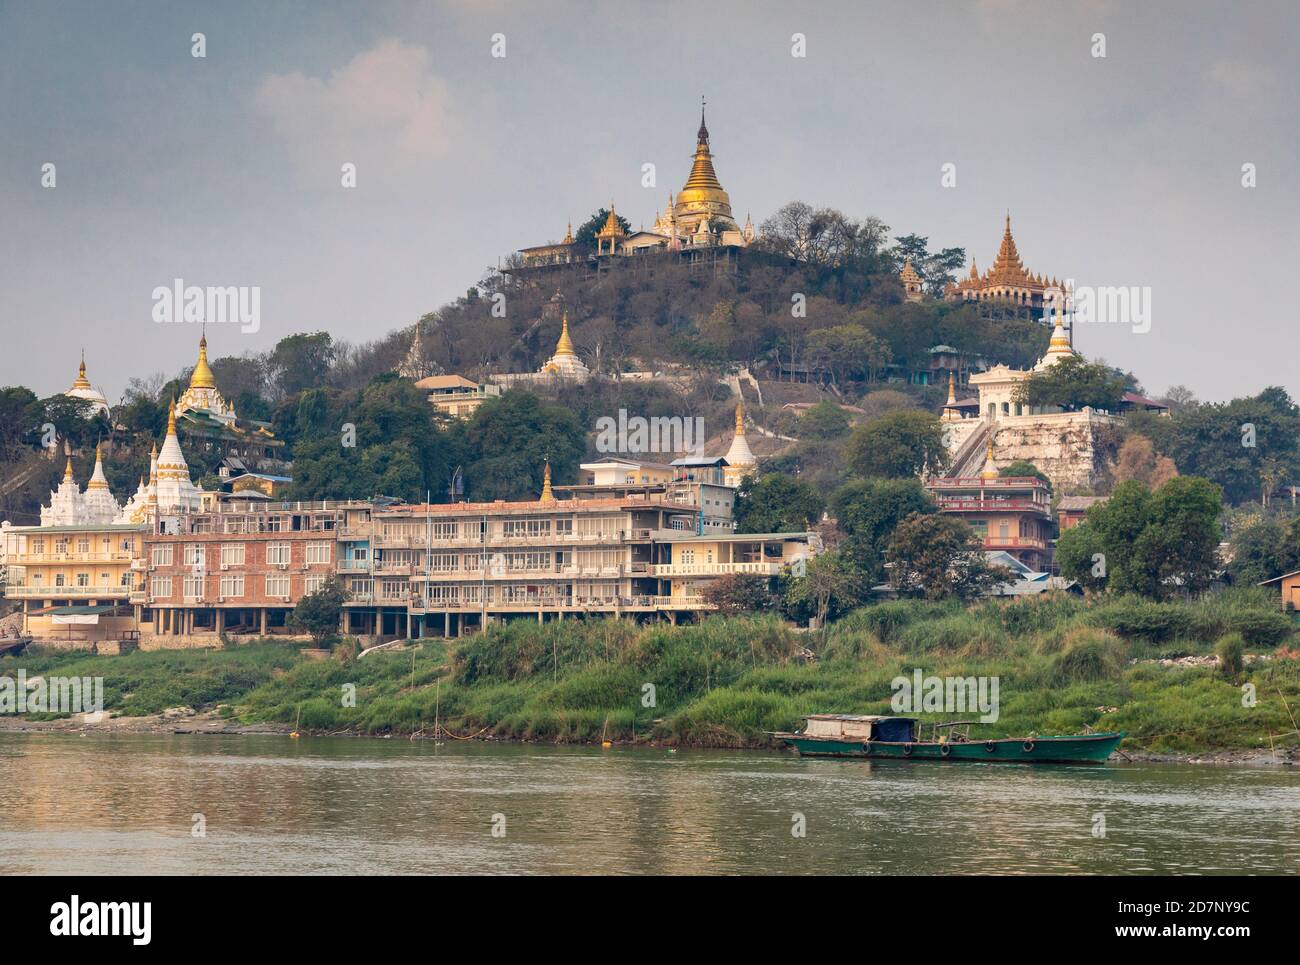 Ancient city of Sagaing at the Irrawaddy river, Myanmar Stock Photo